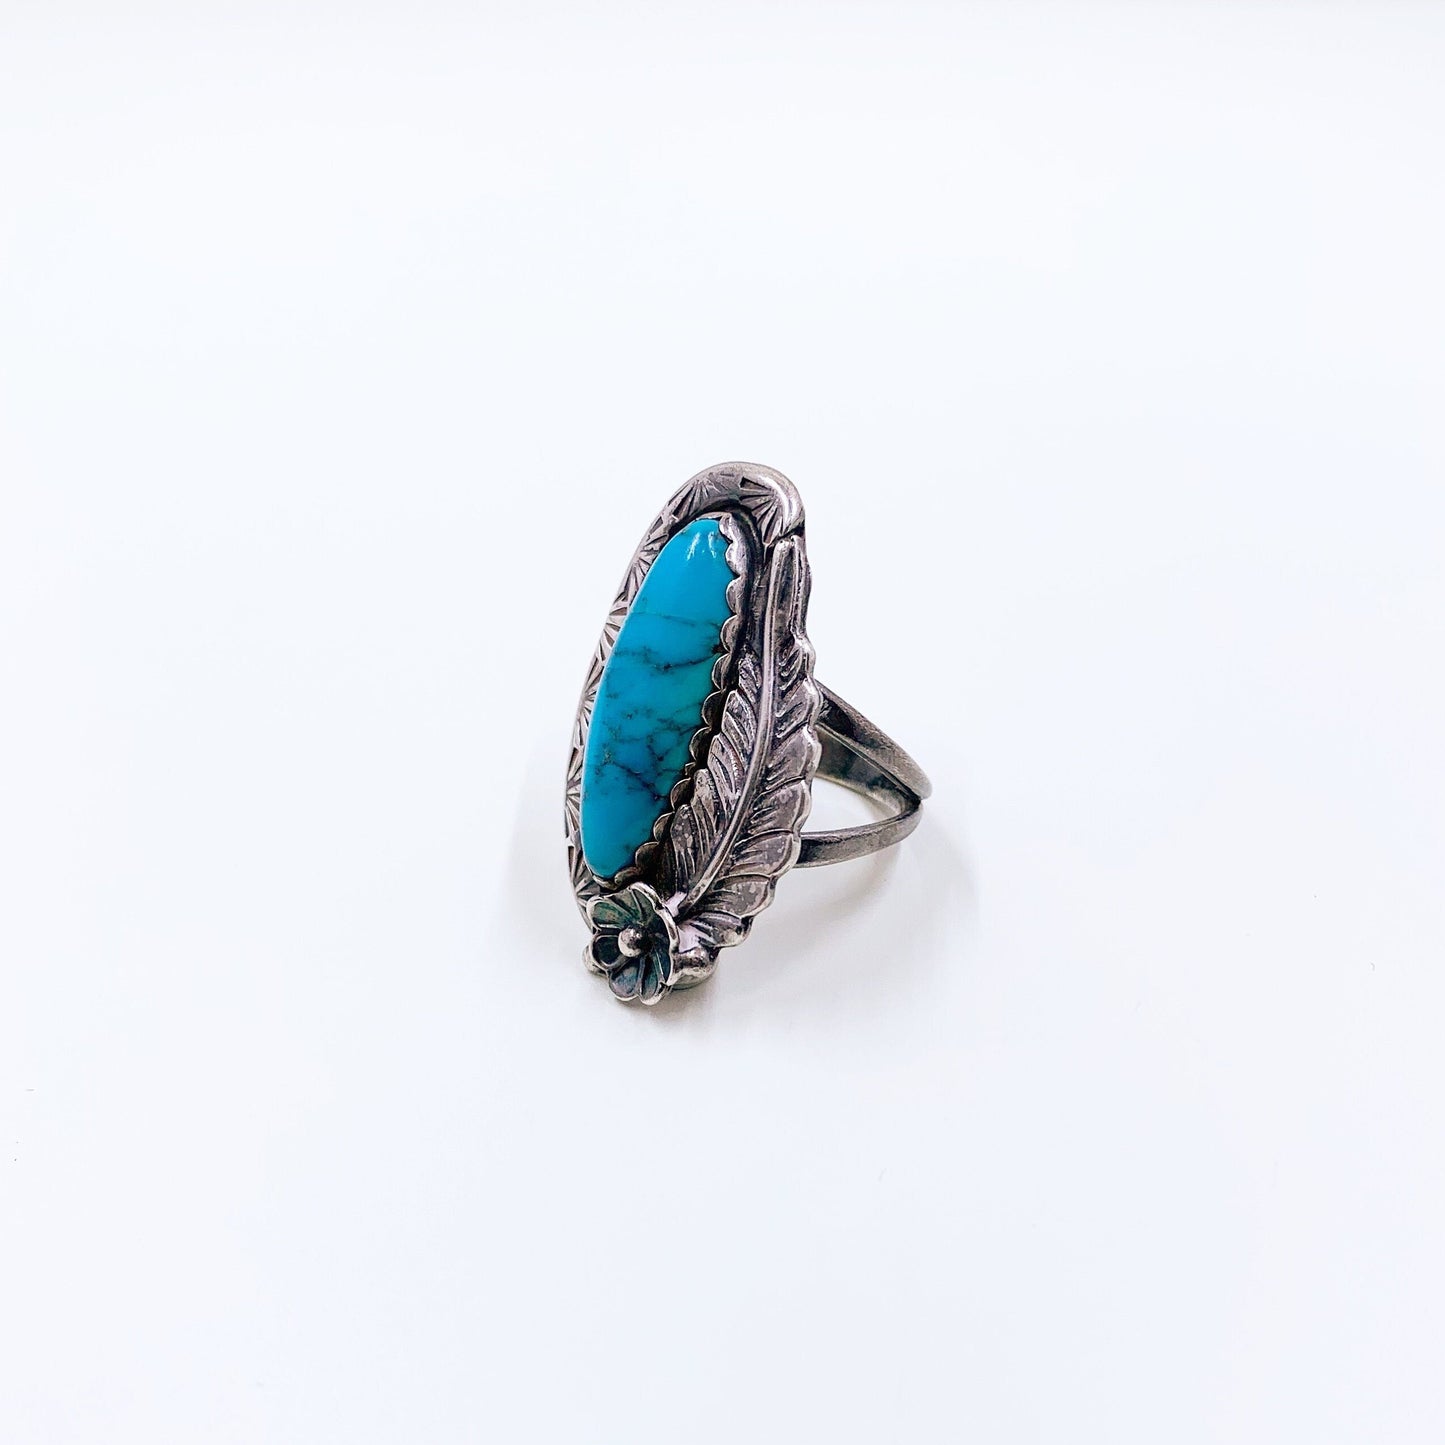 Vintage Sterling Turquoise Flower and Leaf Ring | Southwest Turquoise Stamped Ring | Size 7 1/2 Ring